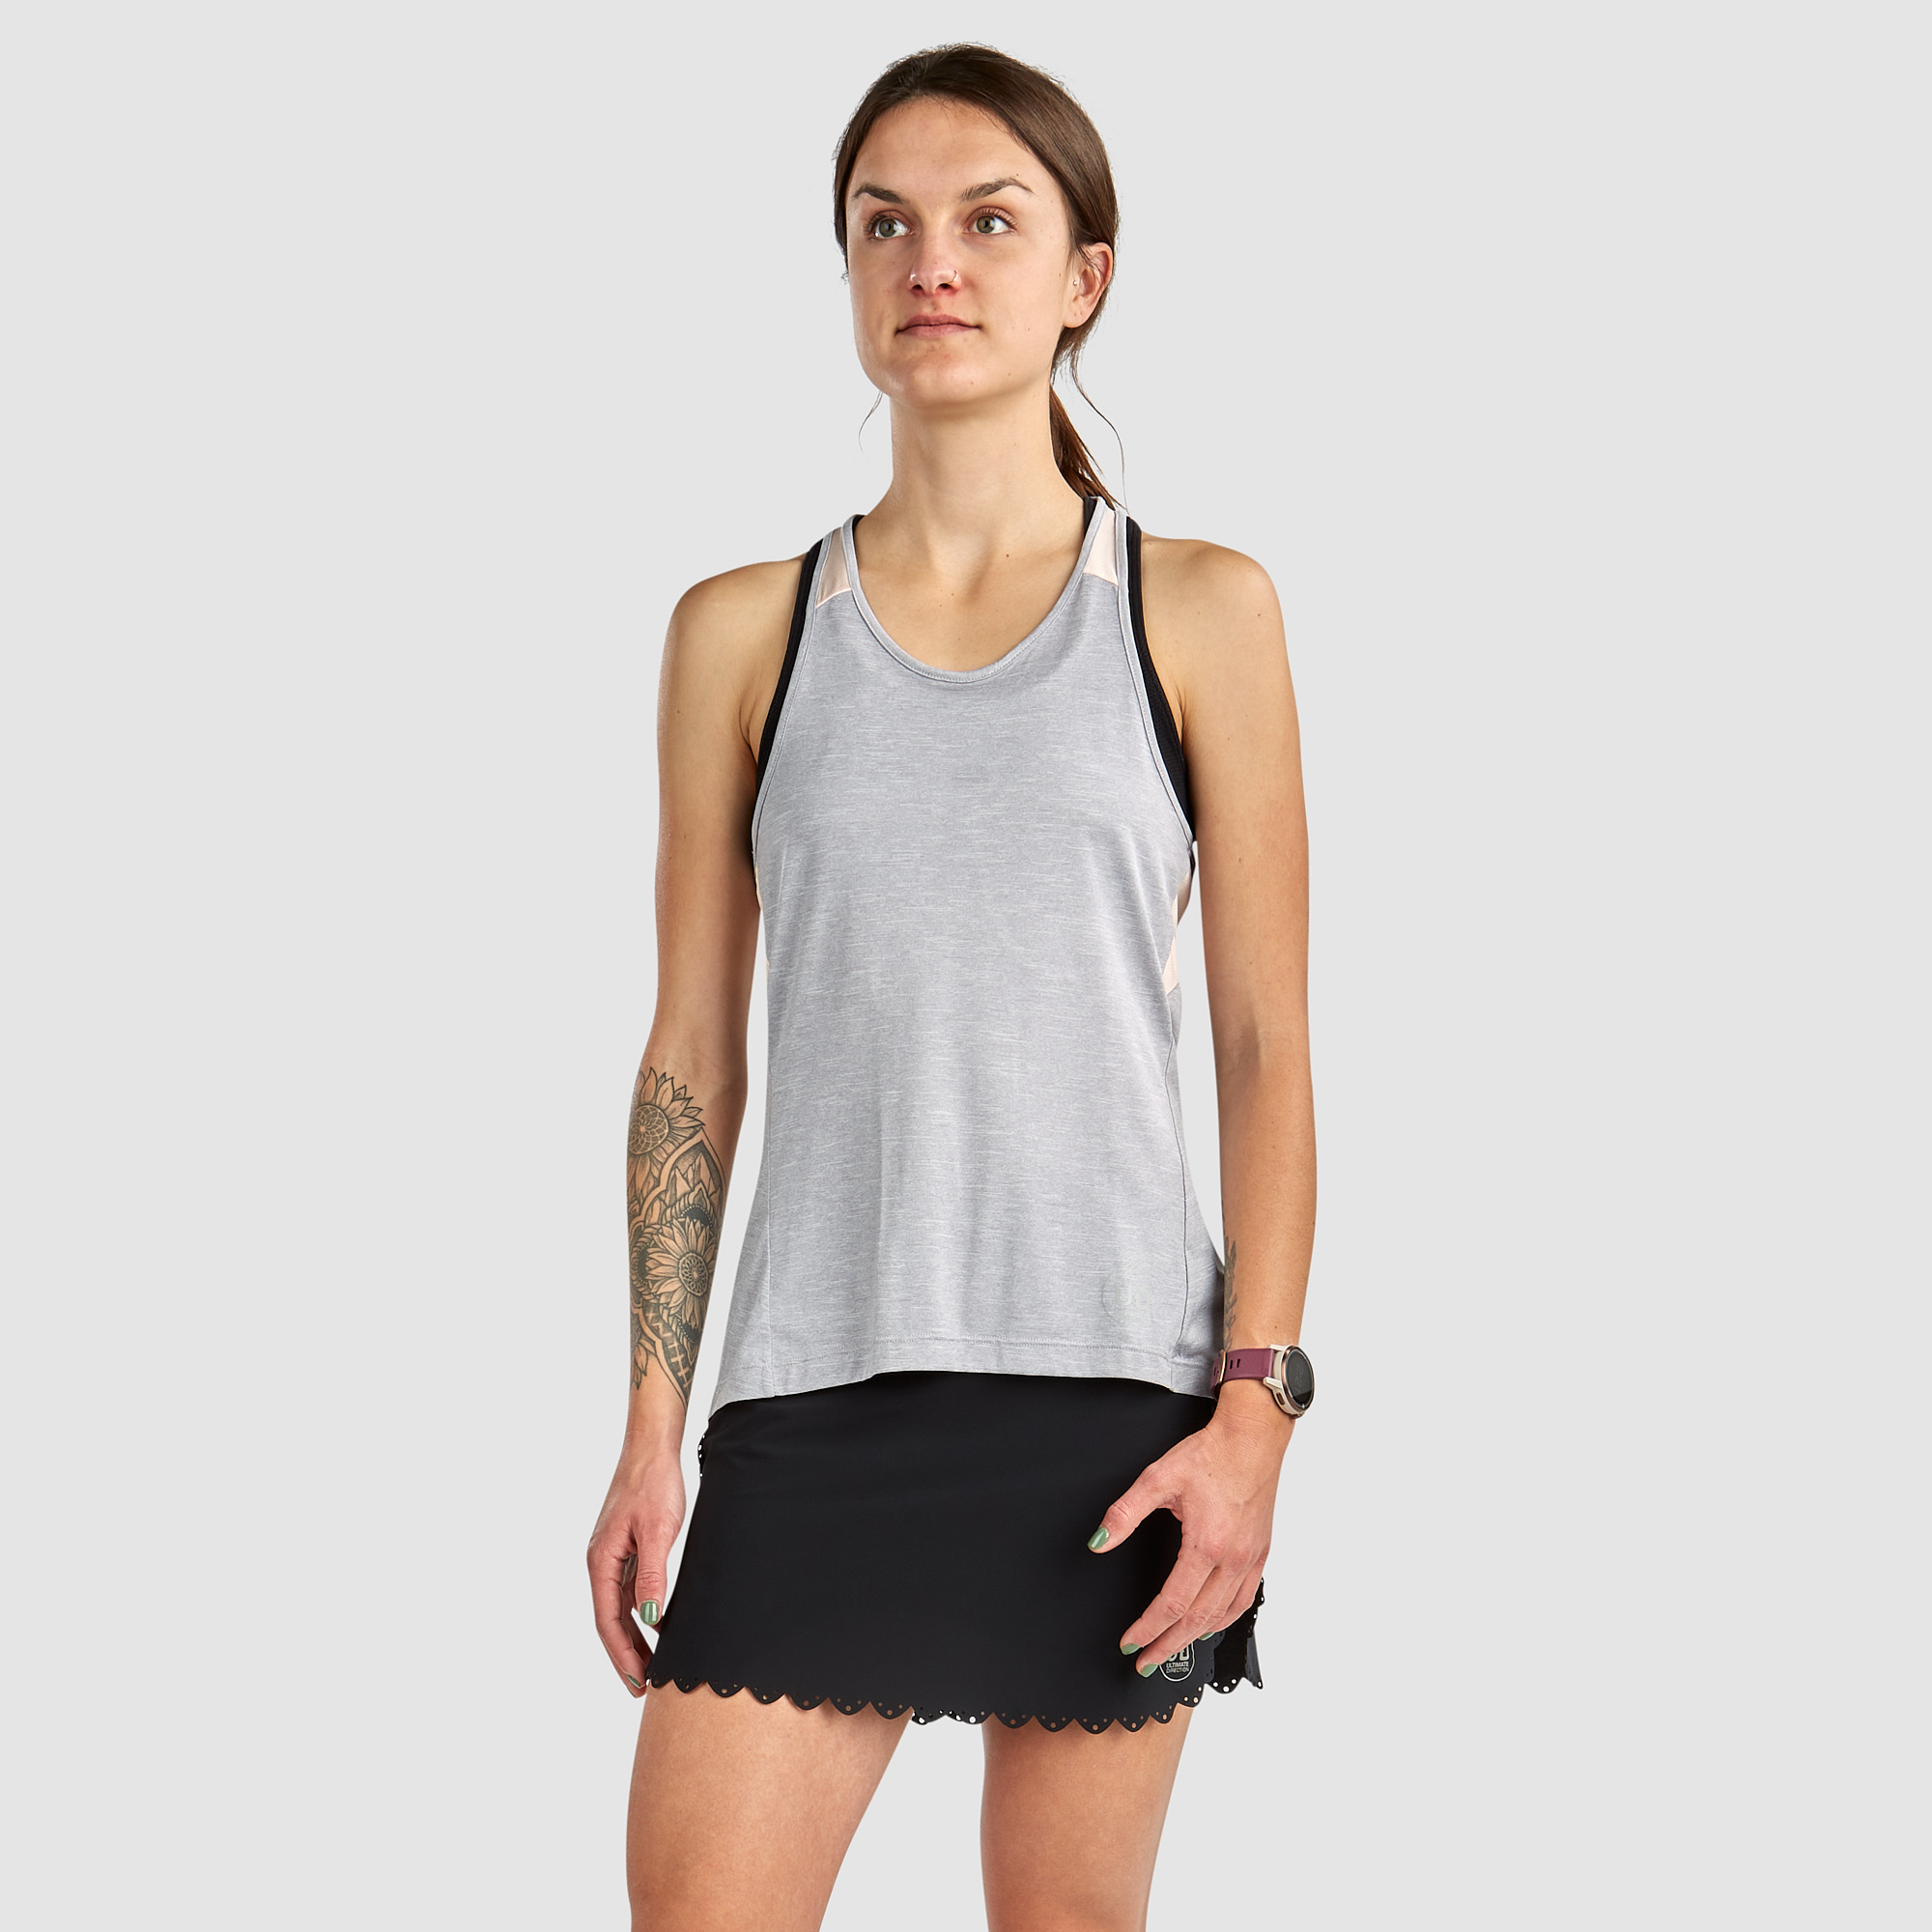 Ultimate Direction Women's Cirrus Singlet - Prior Year in Heather Gray Size Large